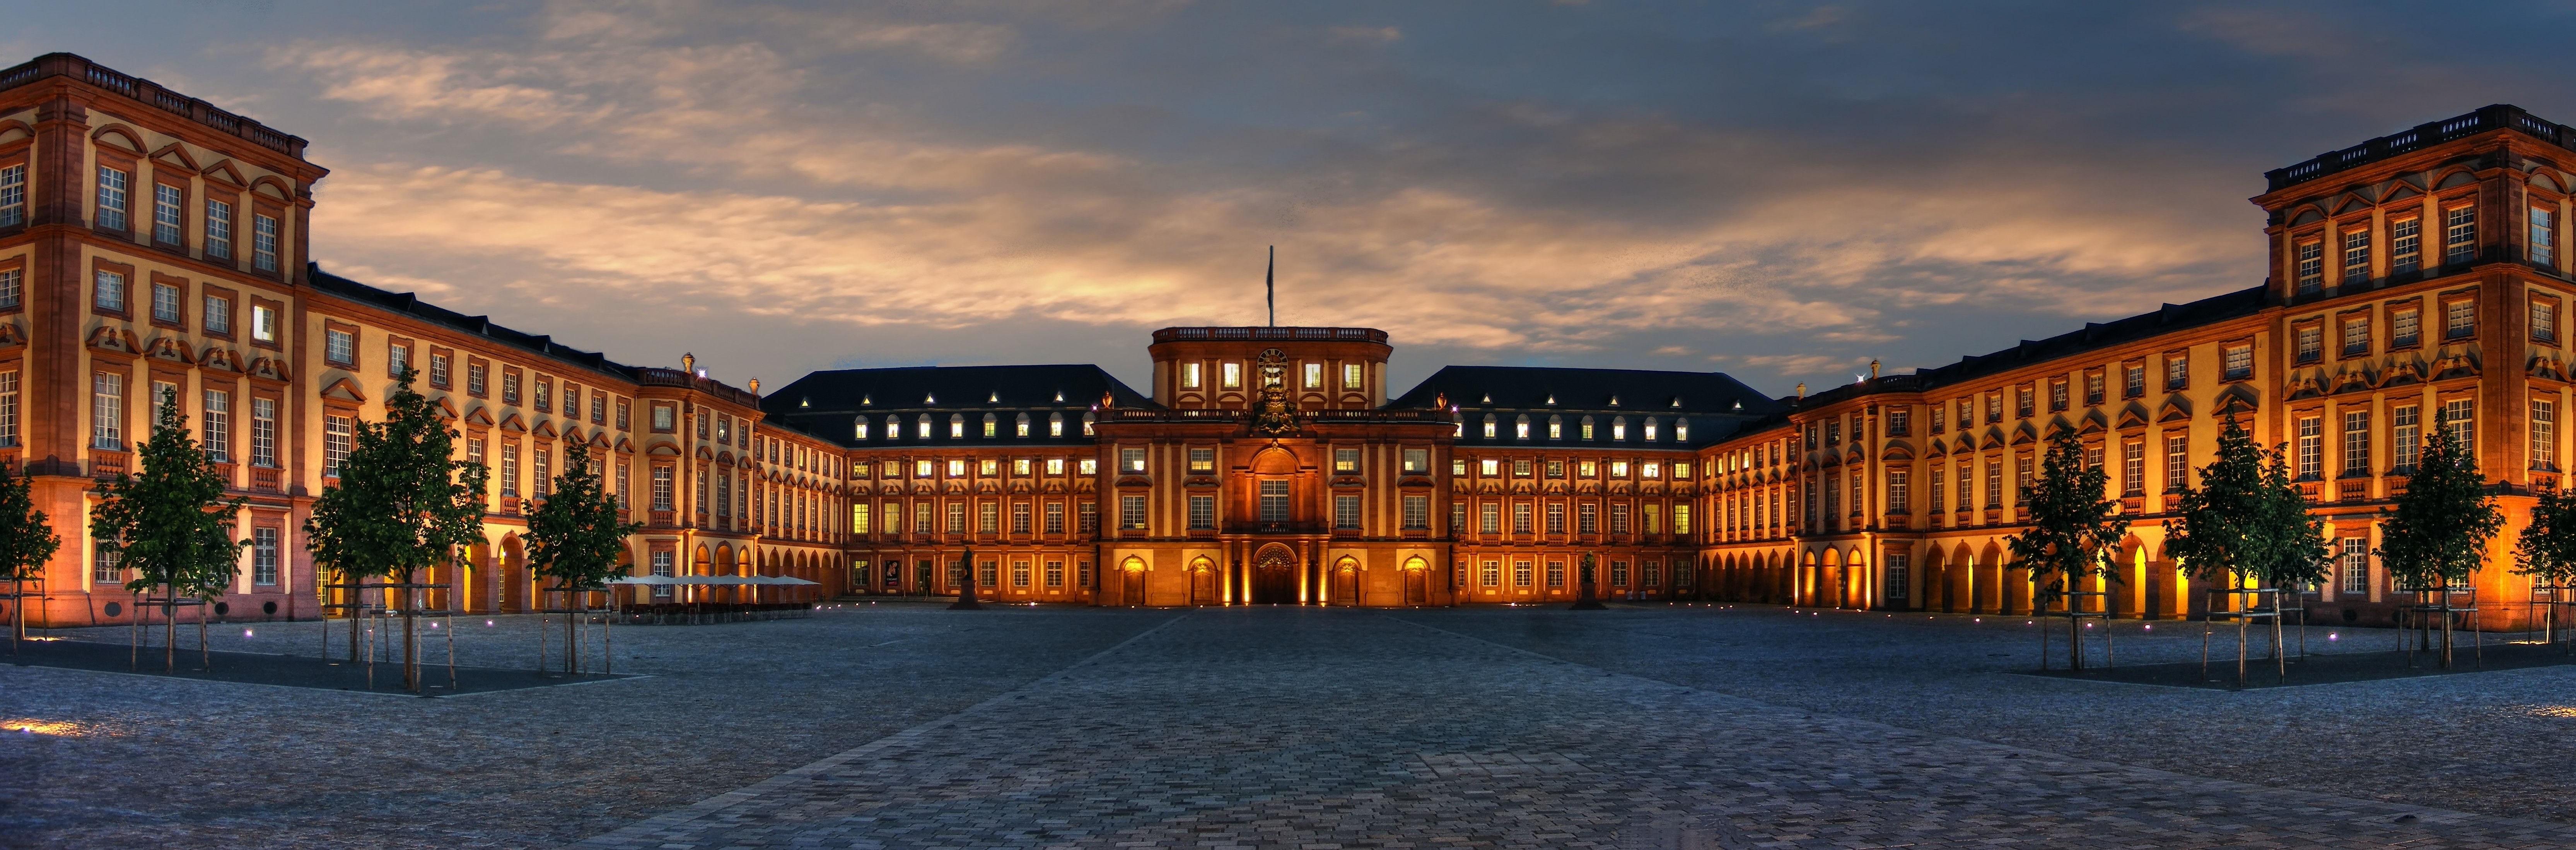 HD Quality Wallpaper | Collection: Man Made, 6661x2199 Mannheim Palace